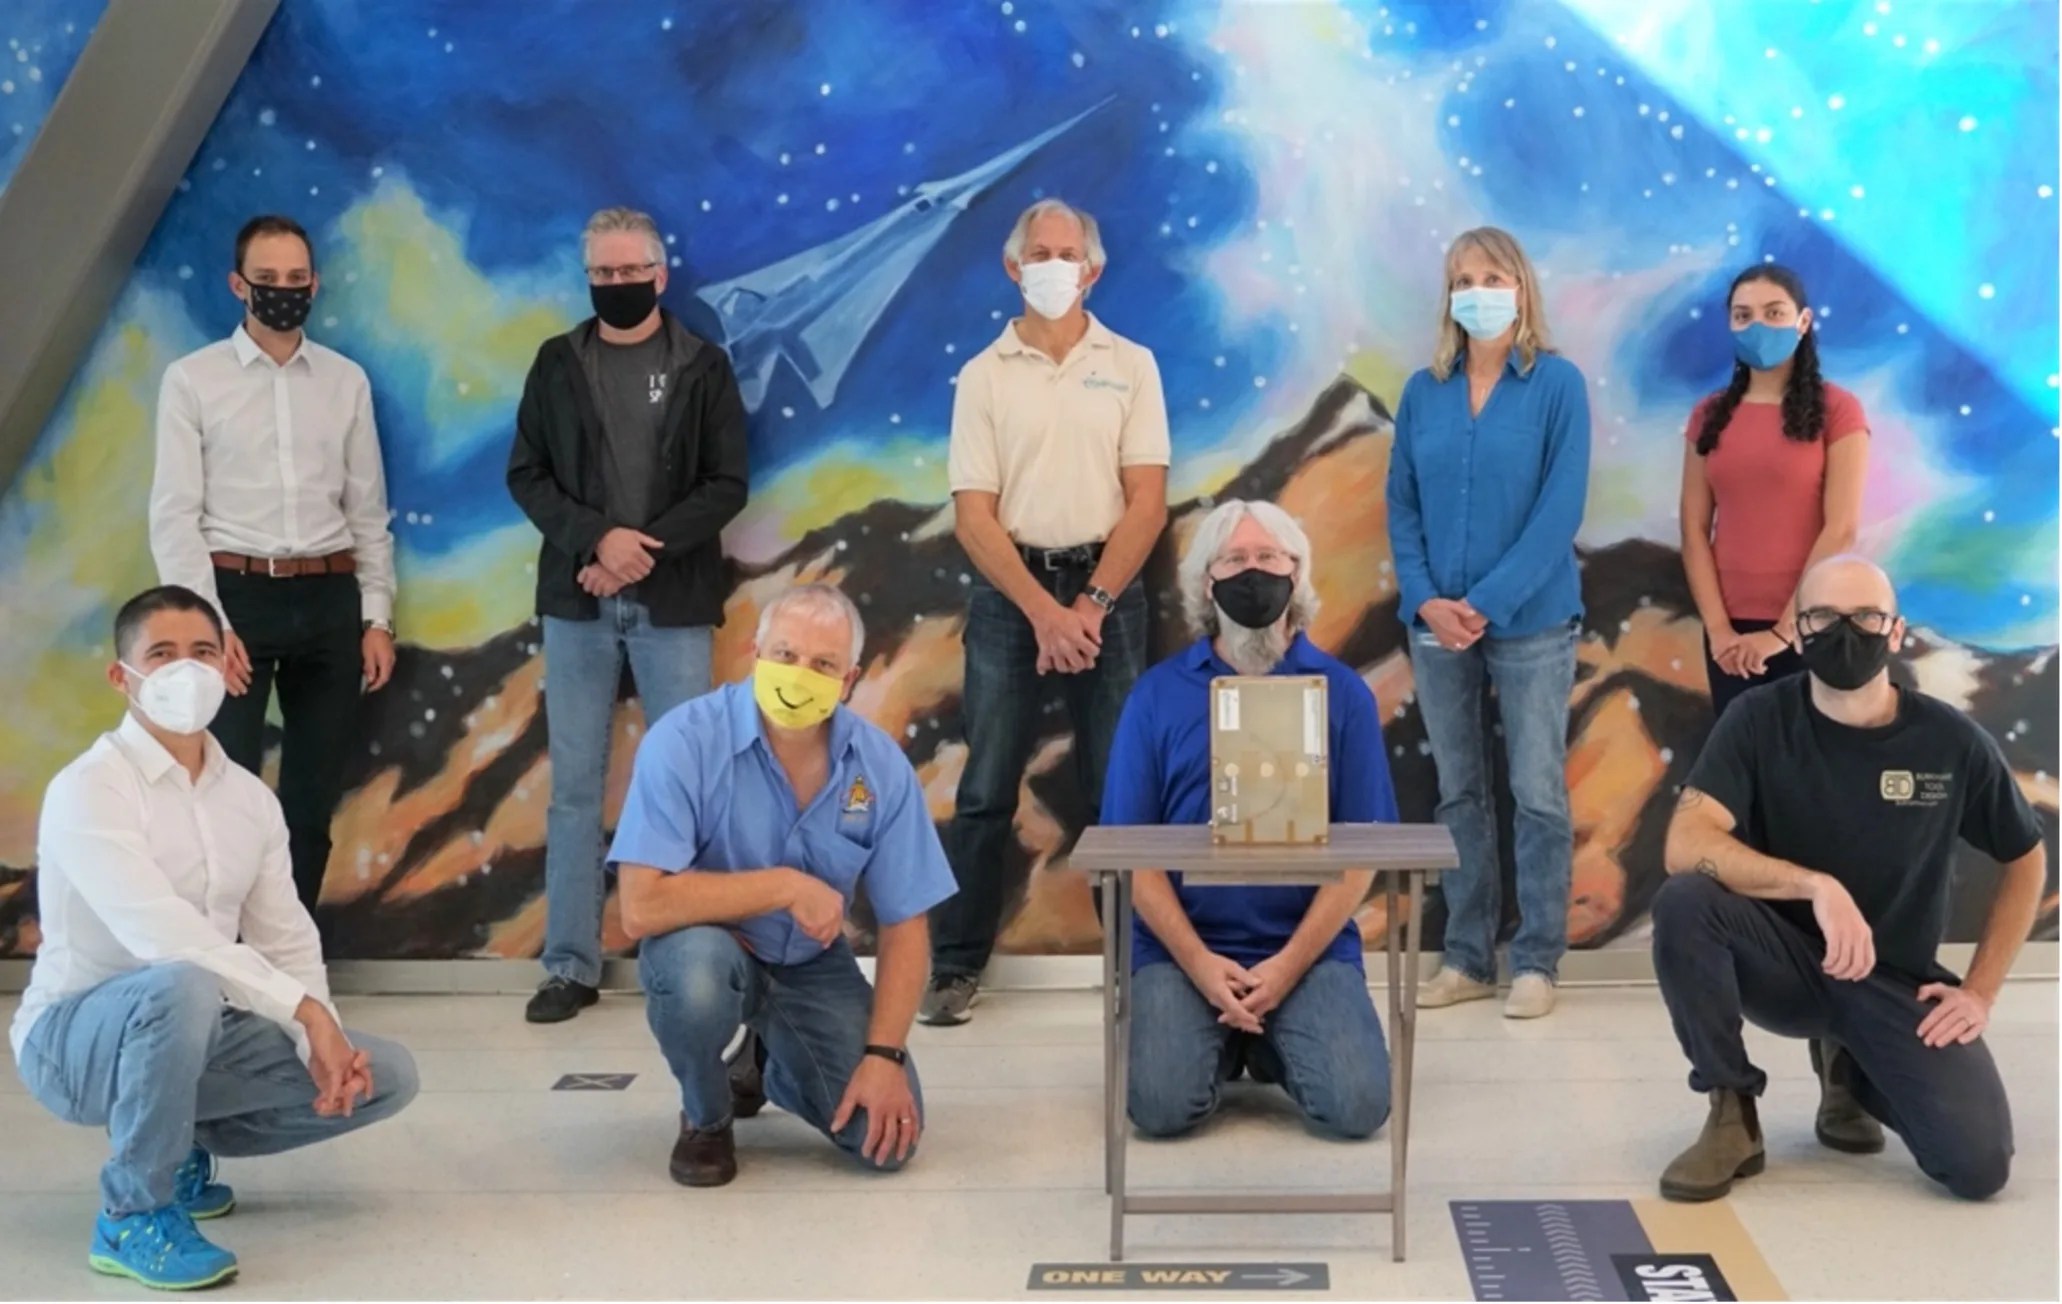 Group photo of 7 men and 2 women, 5 standing in the back and 4 kneeling in the front. The background is a painted mural of a spacecraft above rocky terrain with a blue background. In front of the group is a science component on a small table.